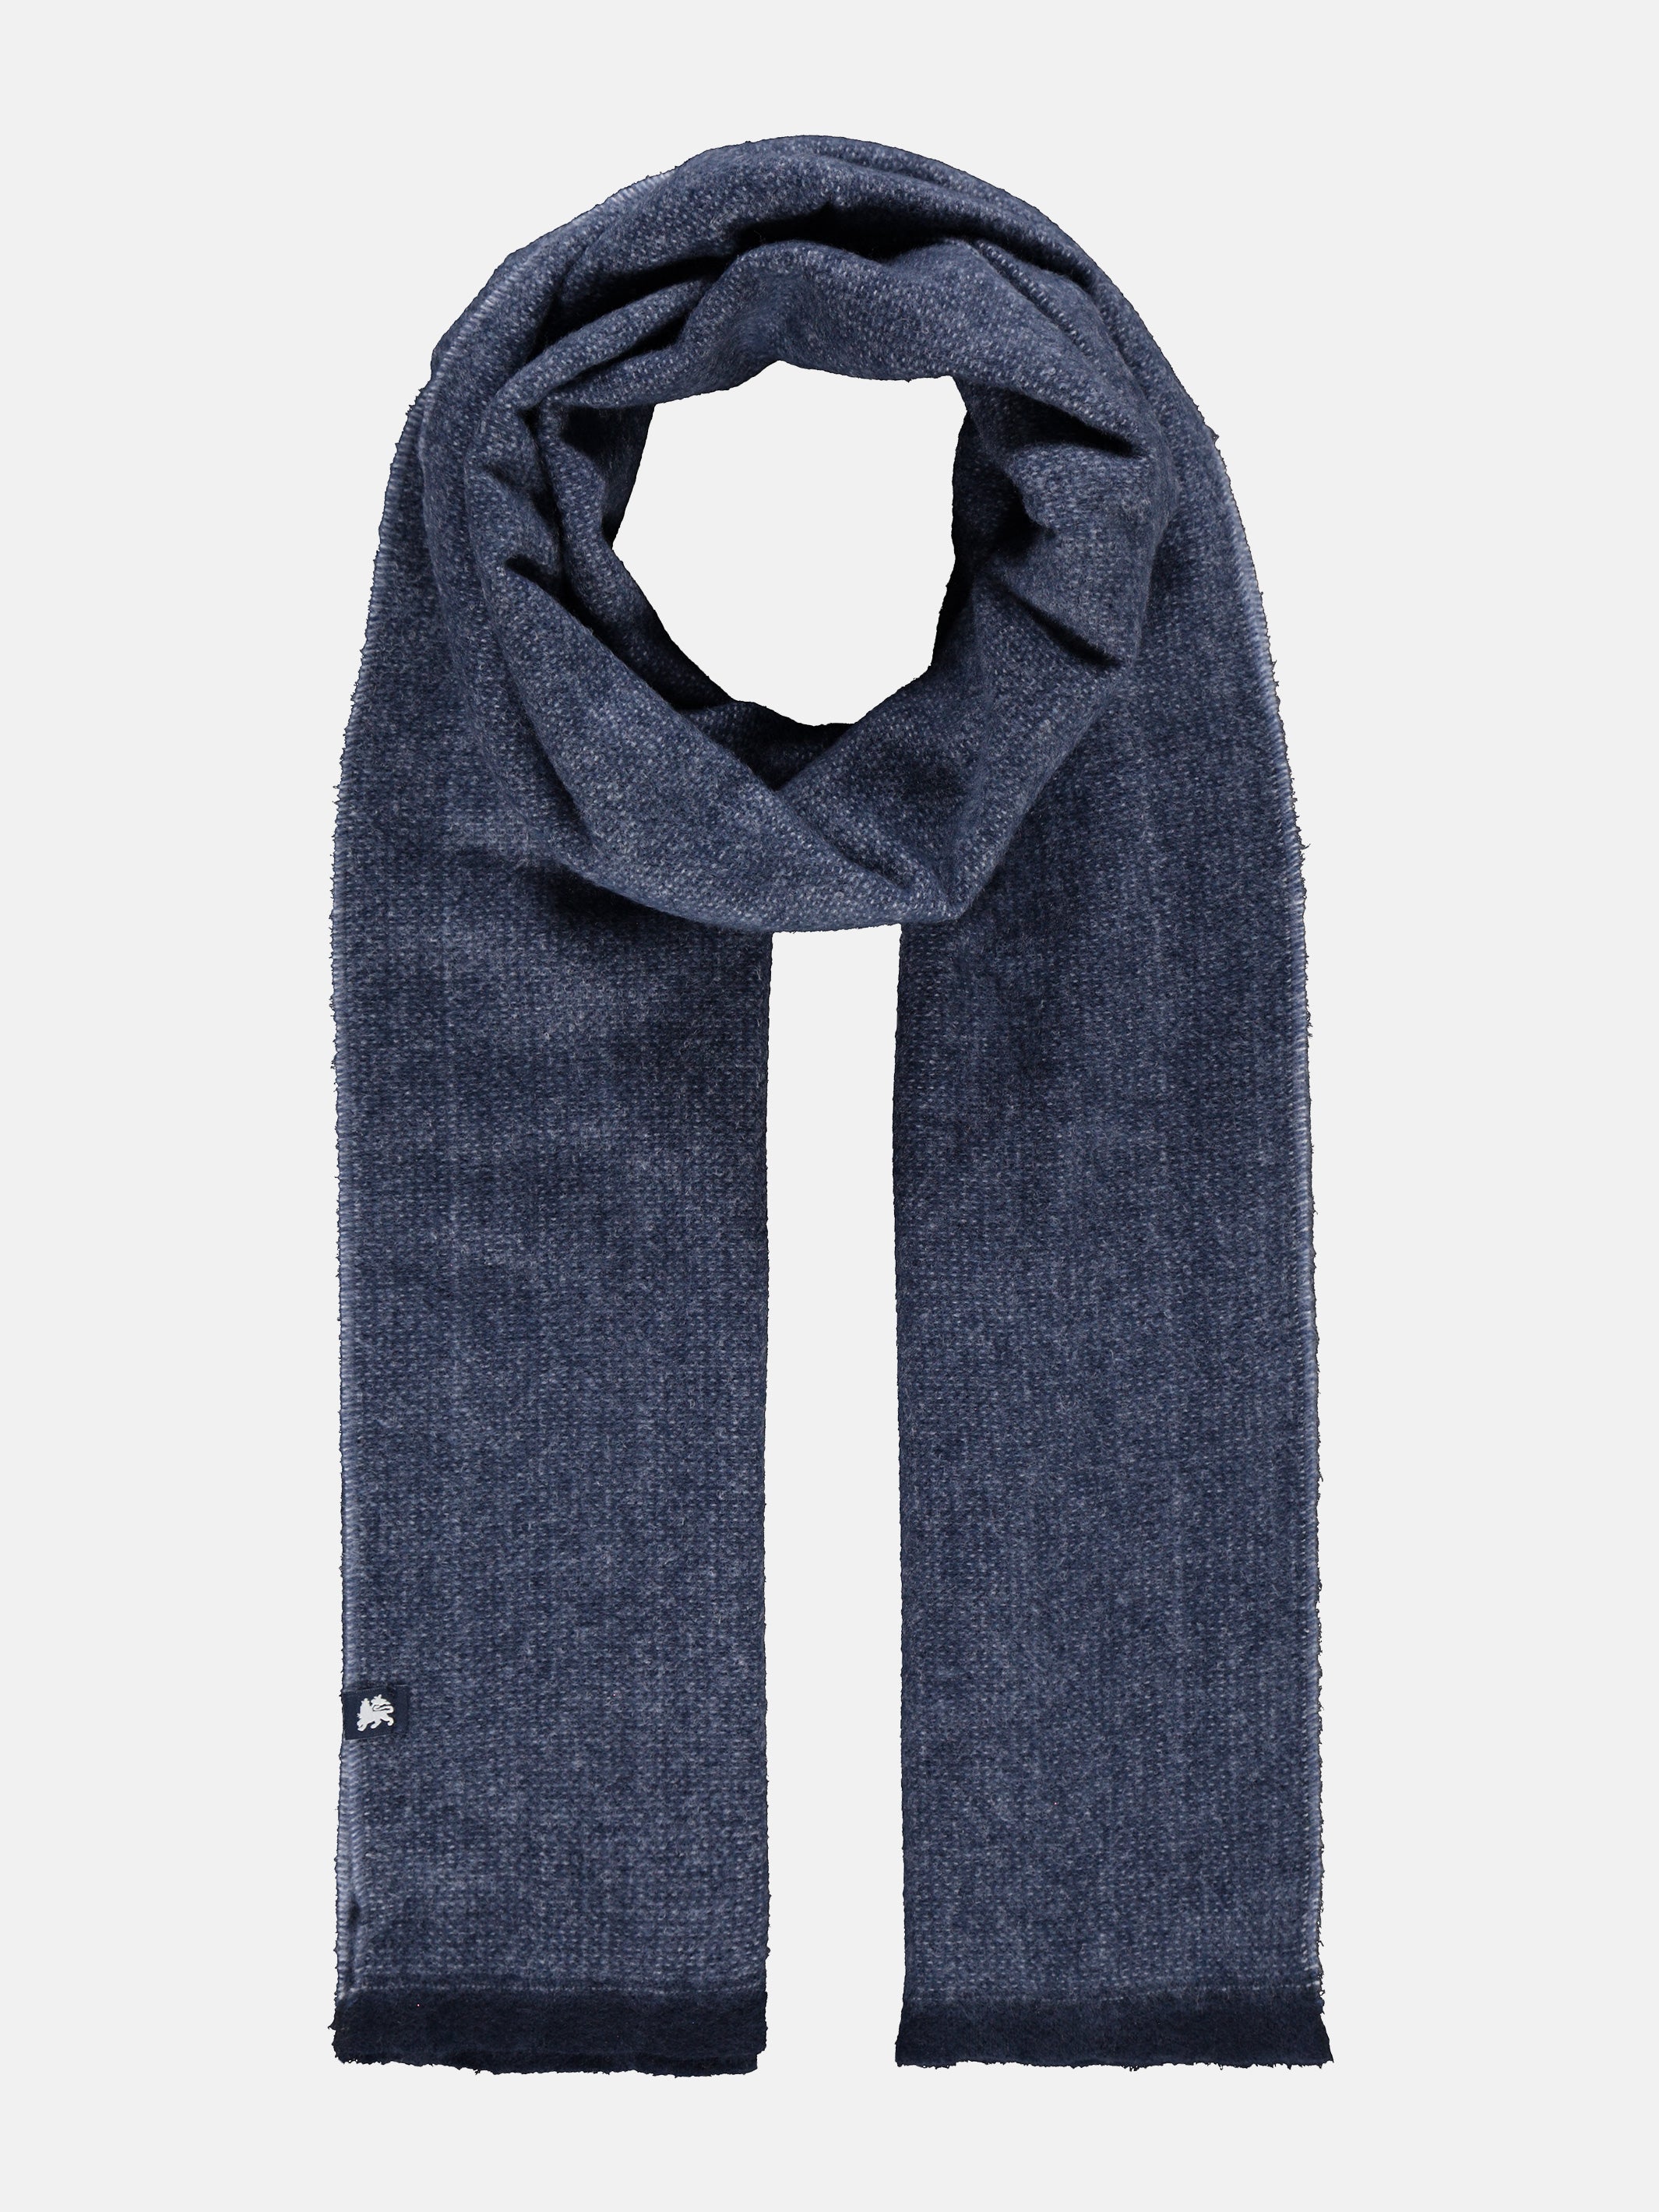 Woven scarf *Soft touch* LERROS – SHOP